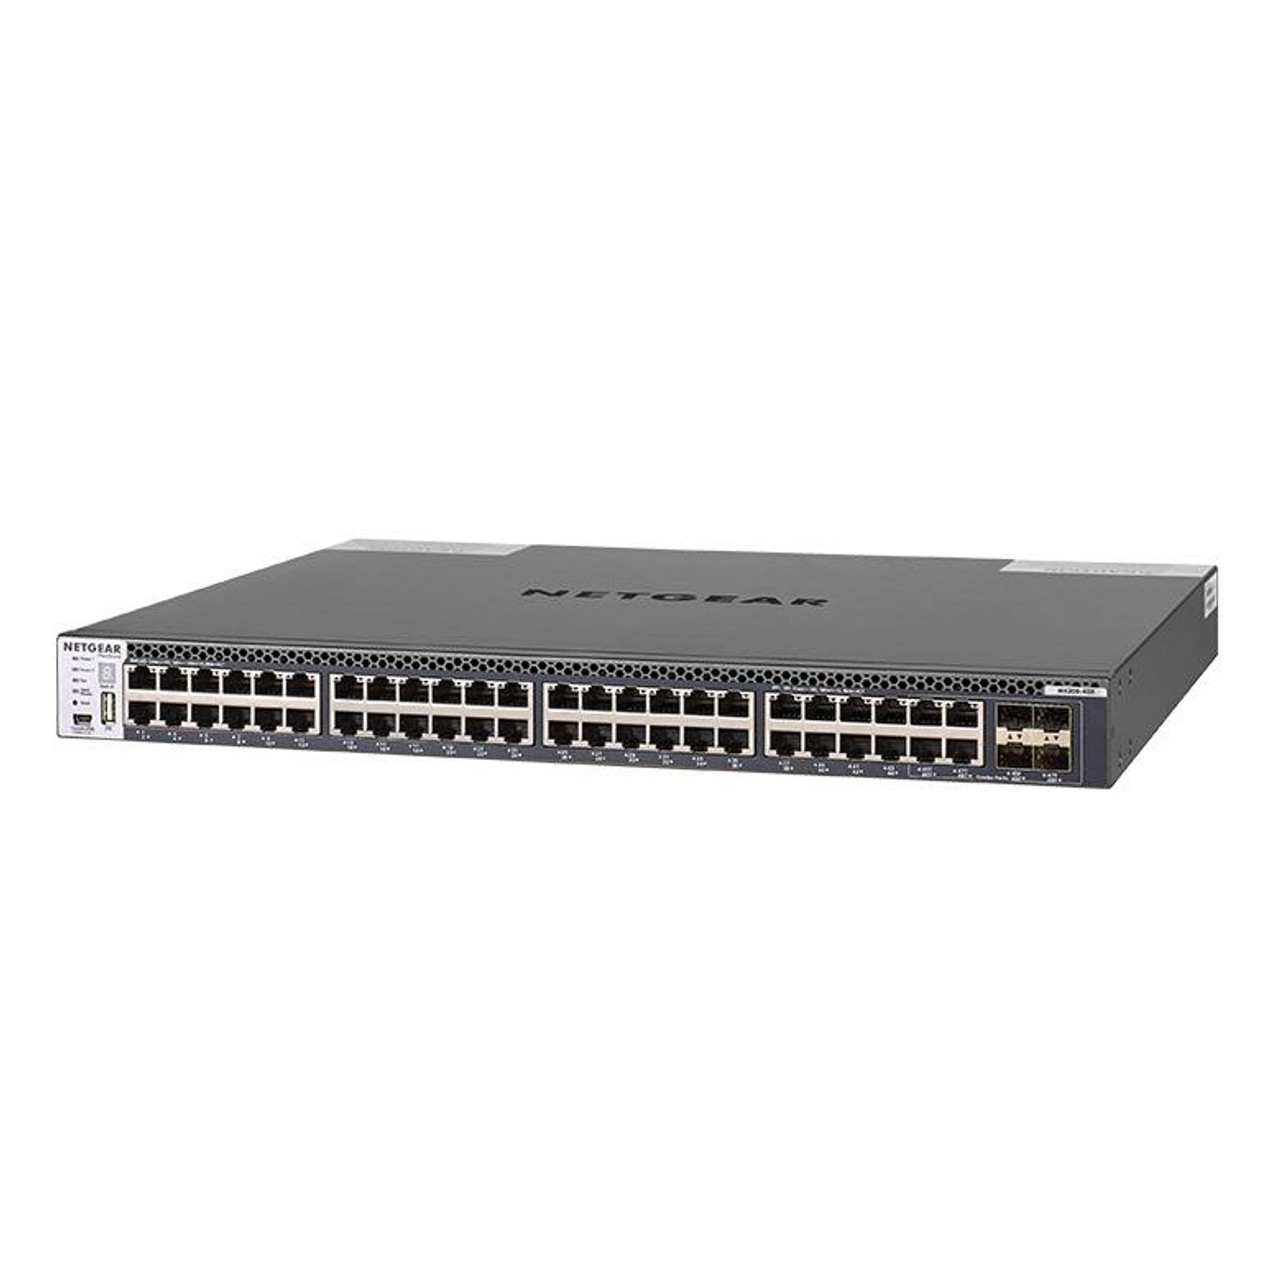 Netgear M4300-48X 48x10G Layer 3 Stackable Managed Switch with 4x10G SFP